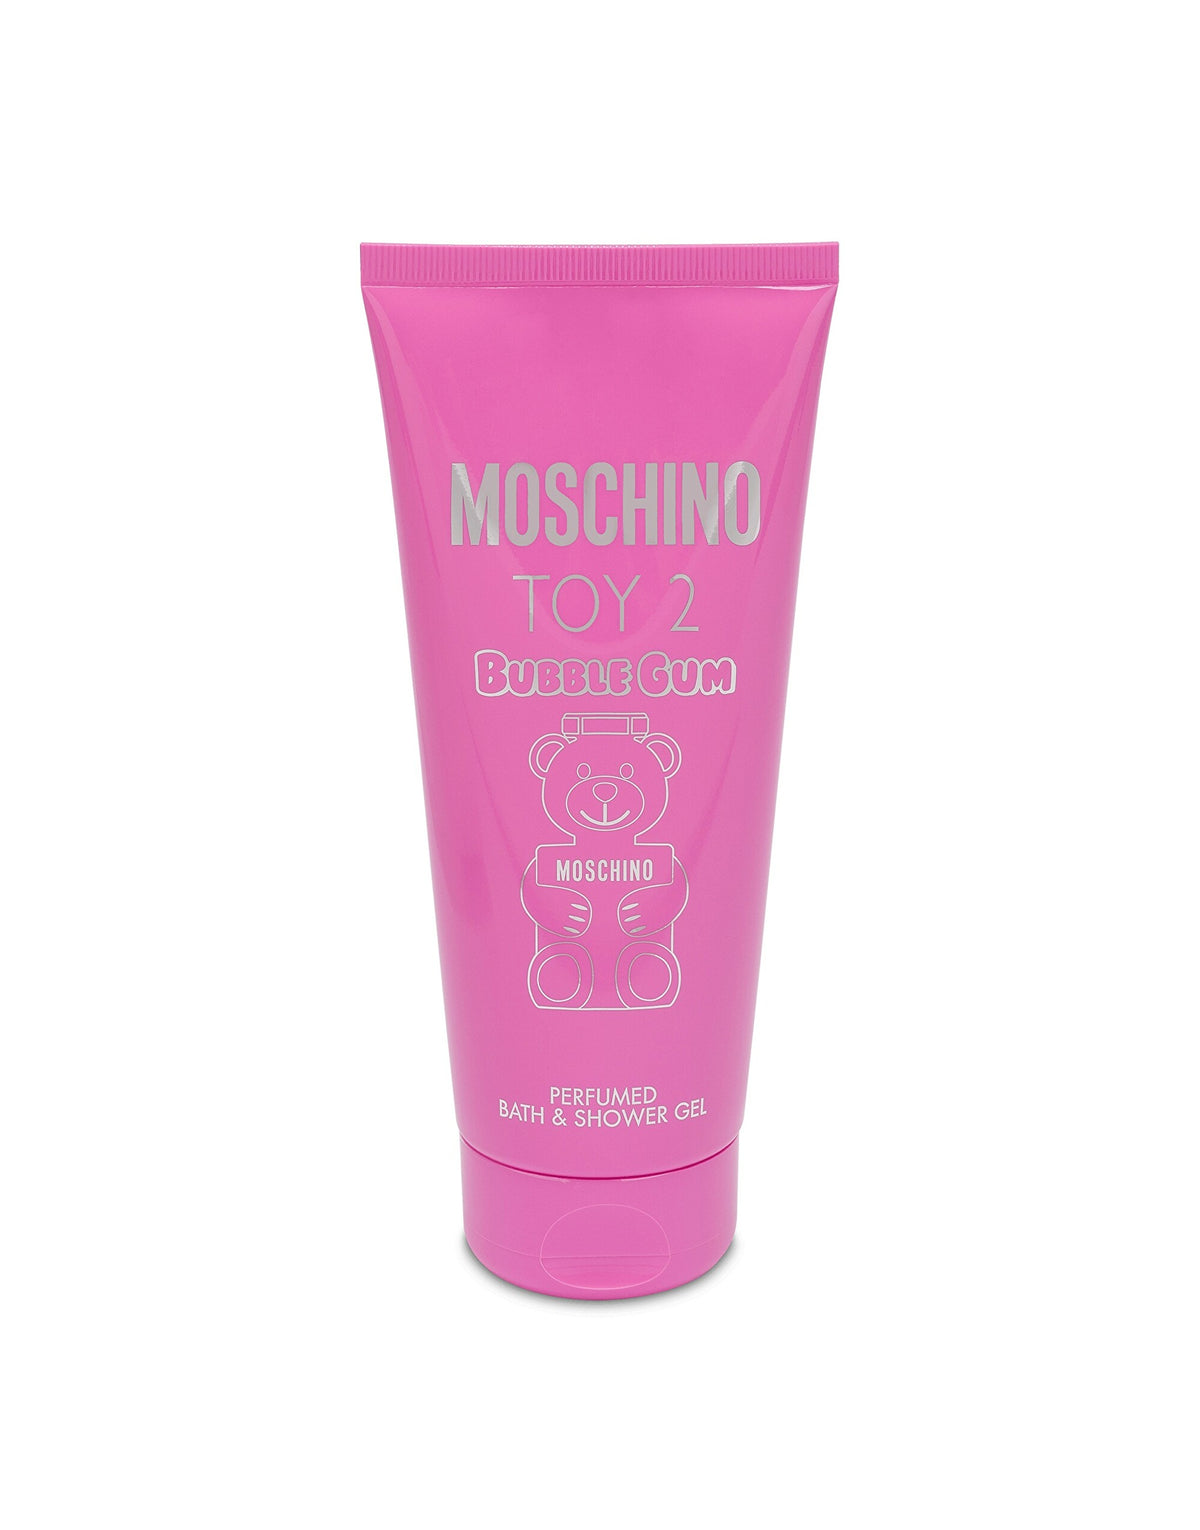 Moschino Toy 2 Bubble Gum Shower gel 200 ml Various